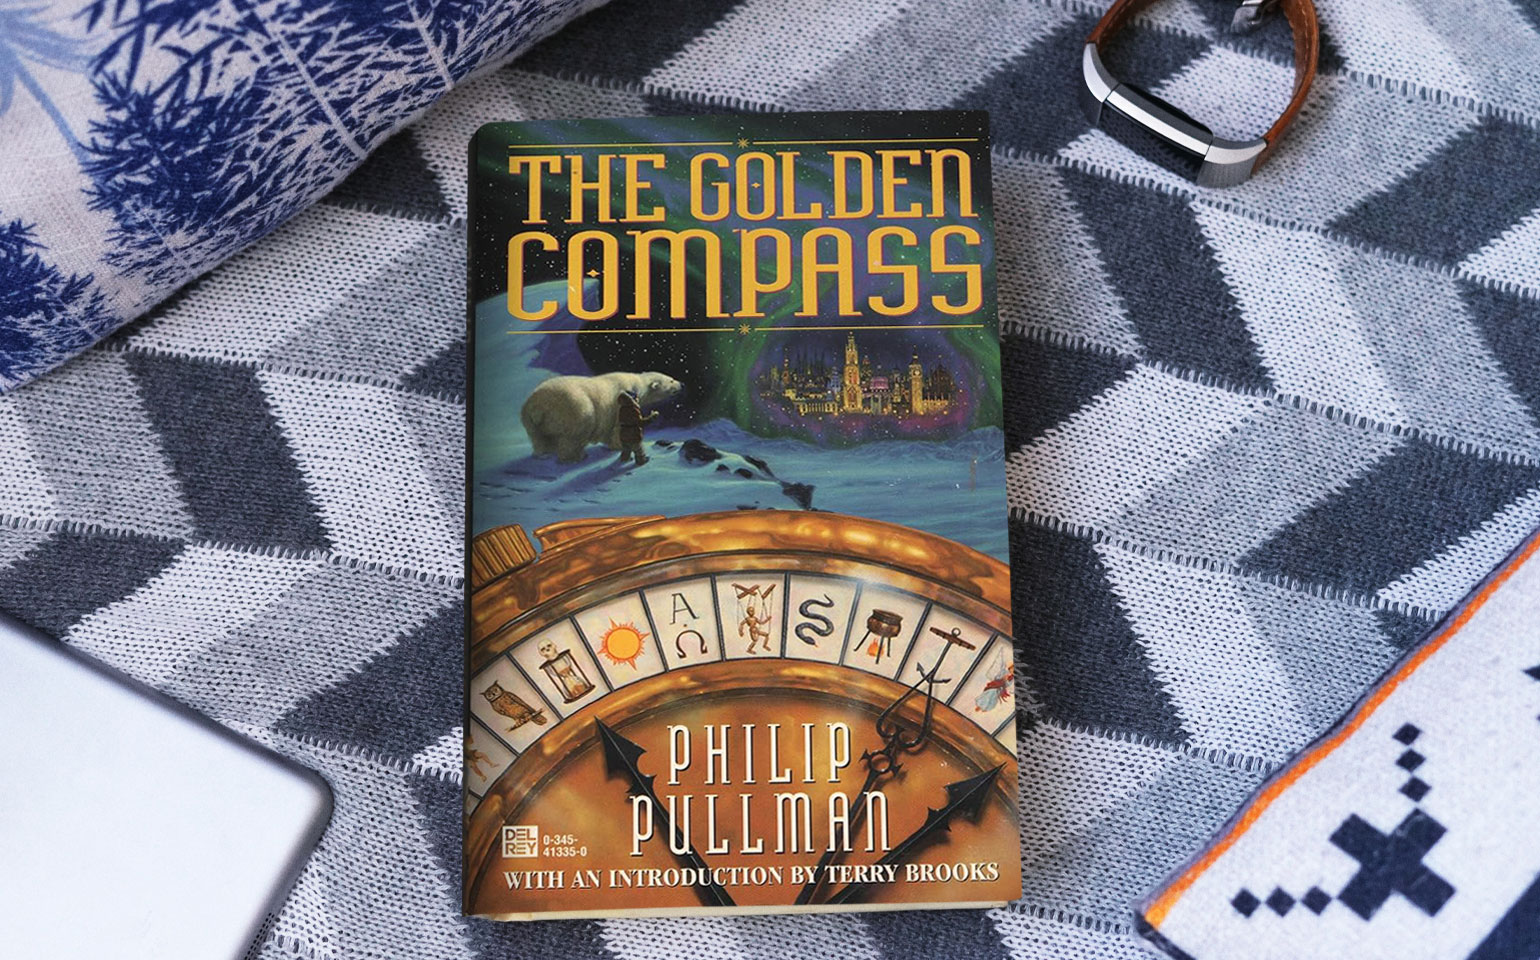 The cover of The Golden Compass is shown.